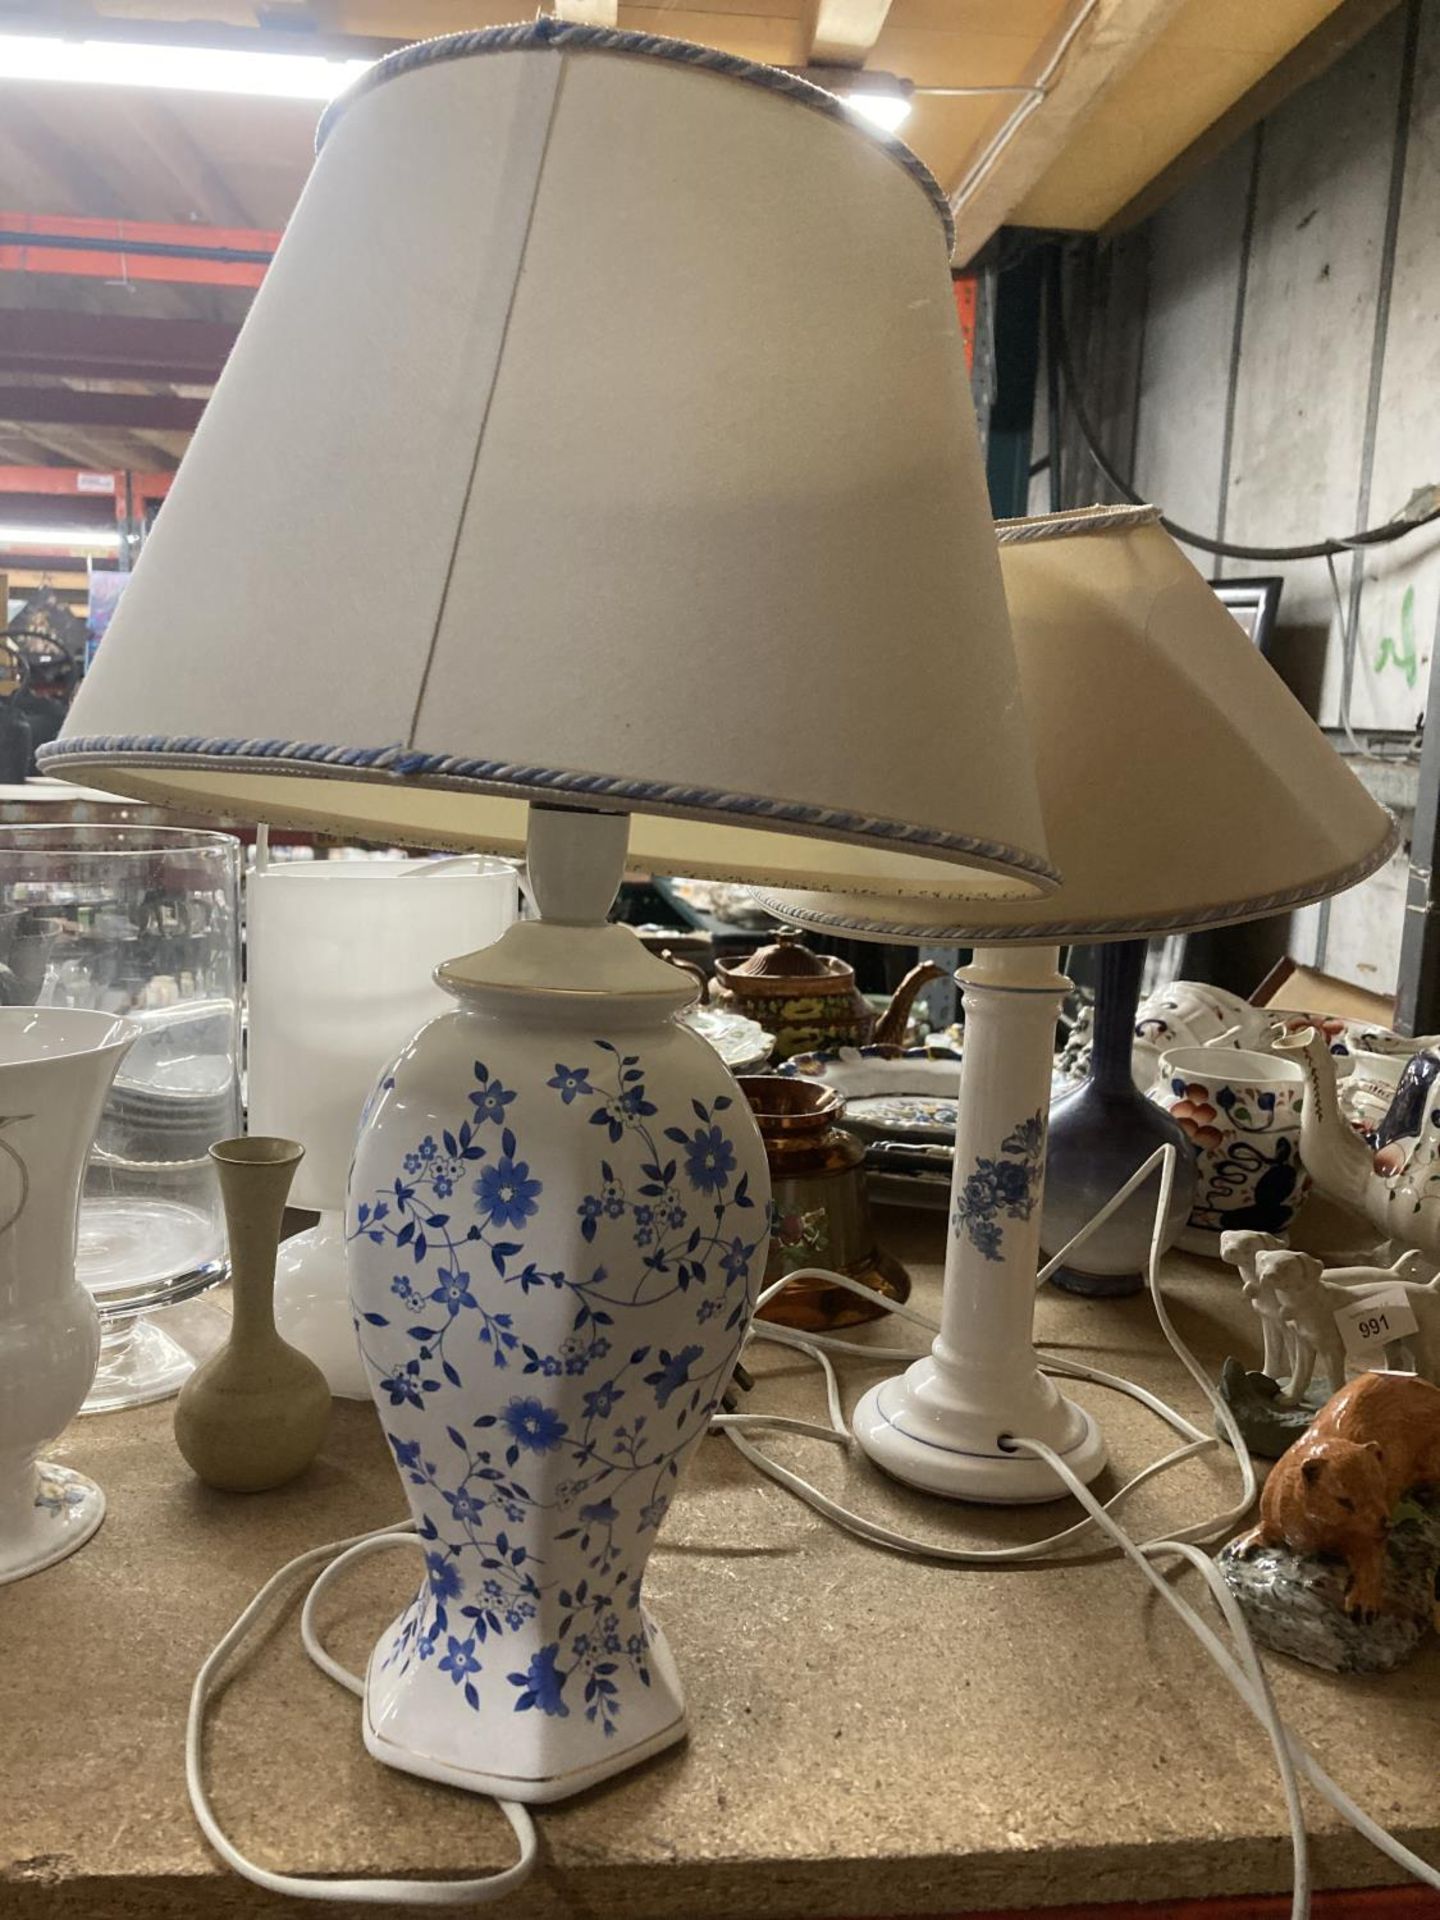 TWO CERAMIC BLUE AND WHITE FLORAL LAMPS WITH CREAM AND BLUE AND WHITE TRIM SHADES